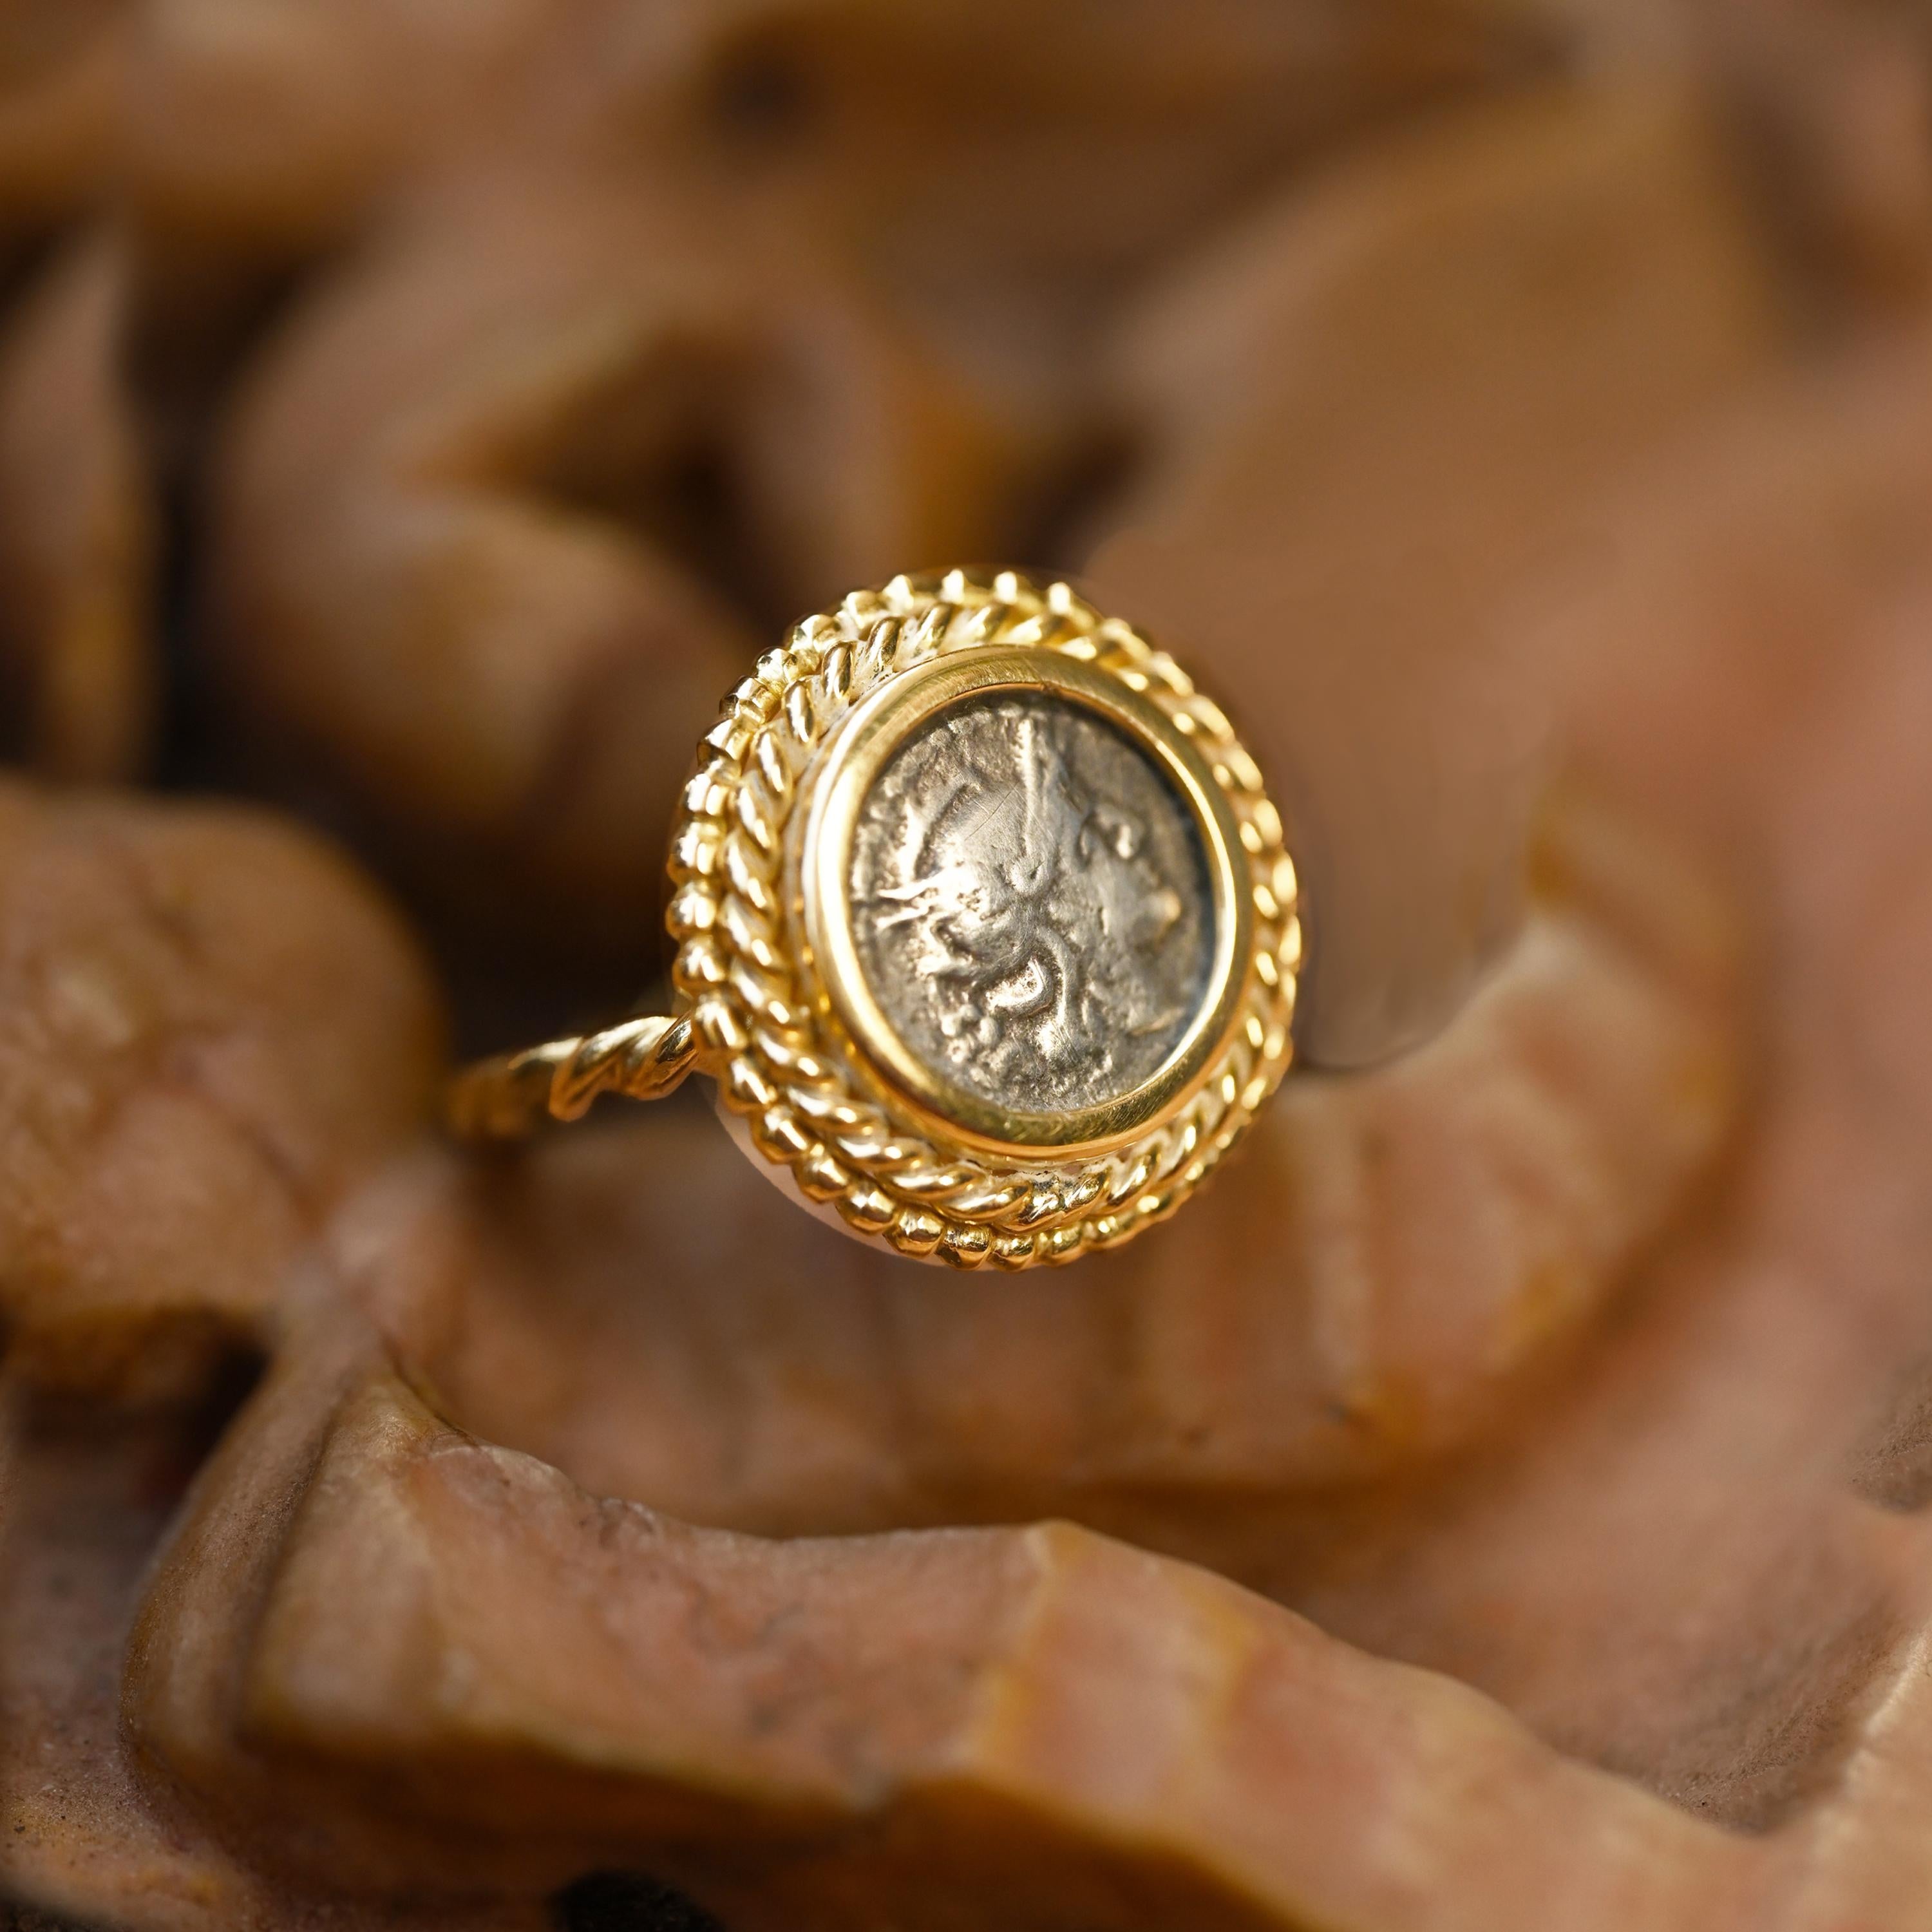 This stunning 18 kt gold ring showcases an authentic silver Roman coin, specifically a sestertius from 211 BC, featuring a depiction of the Goddess Rome. Meticulously crafted, this ring is a testament to artistic skill and attention to detail. The